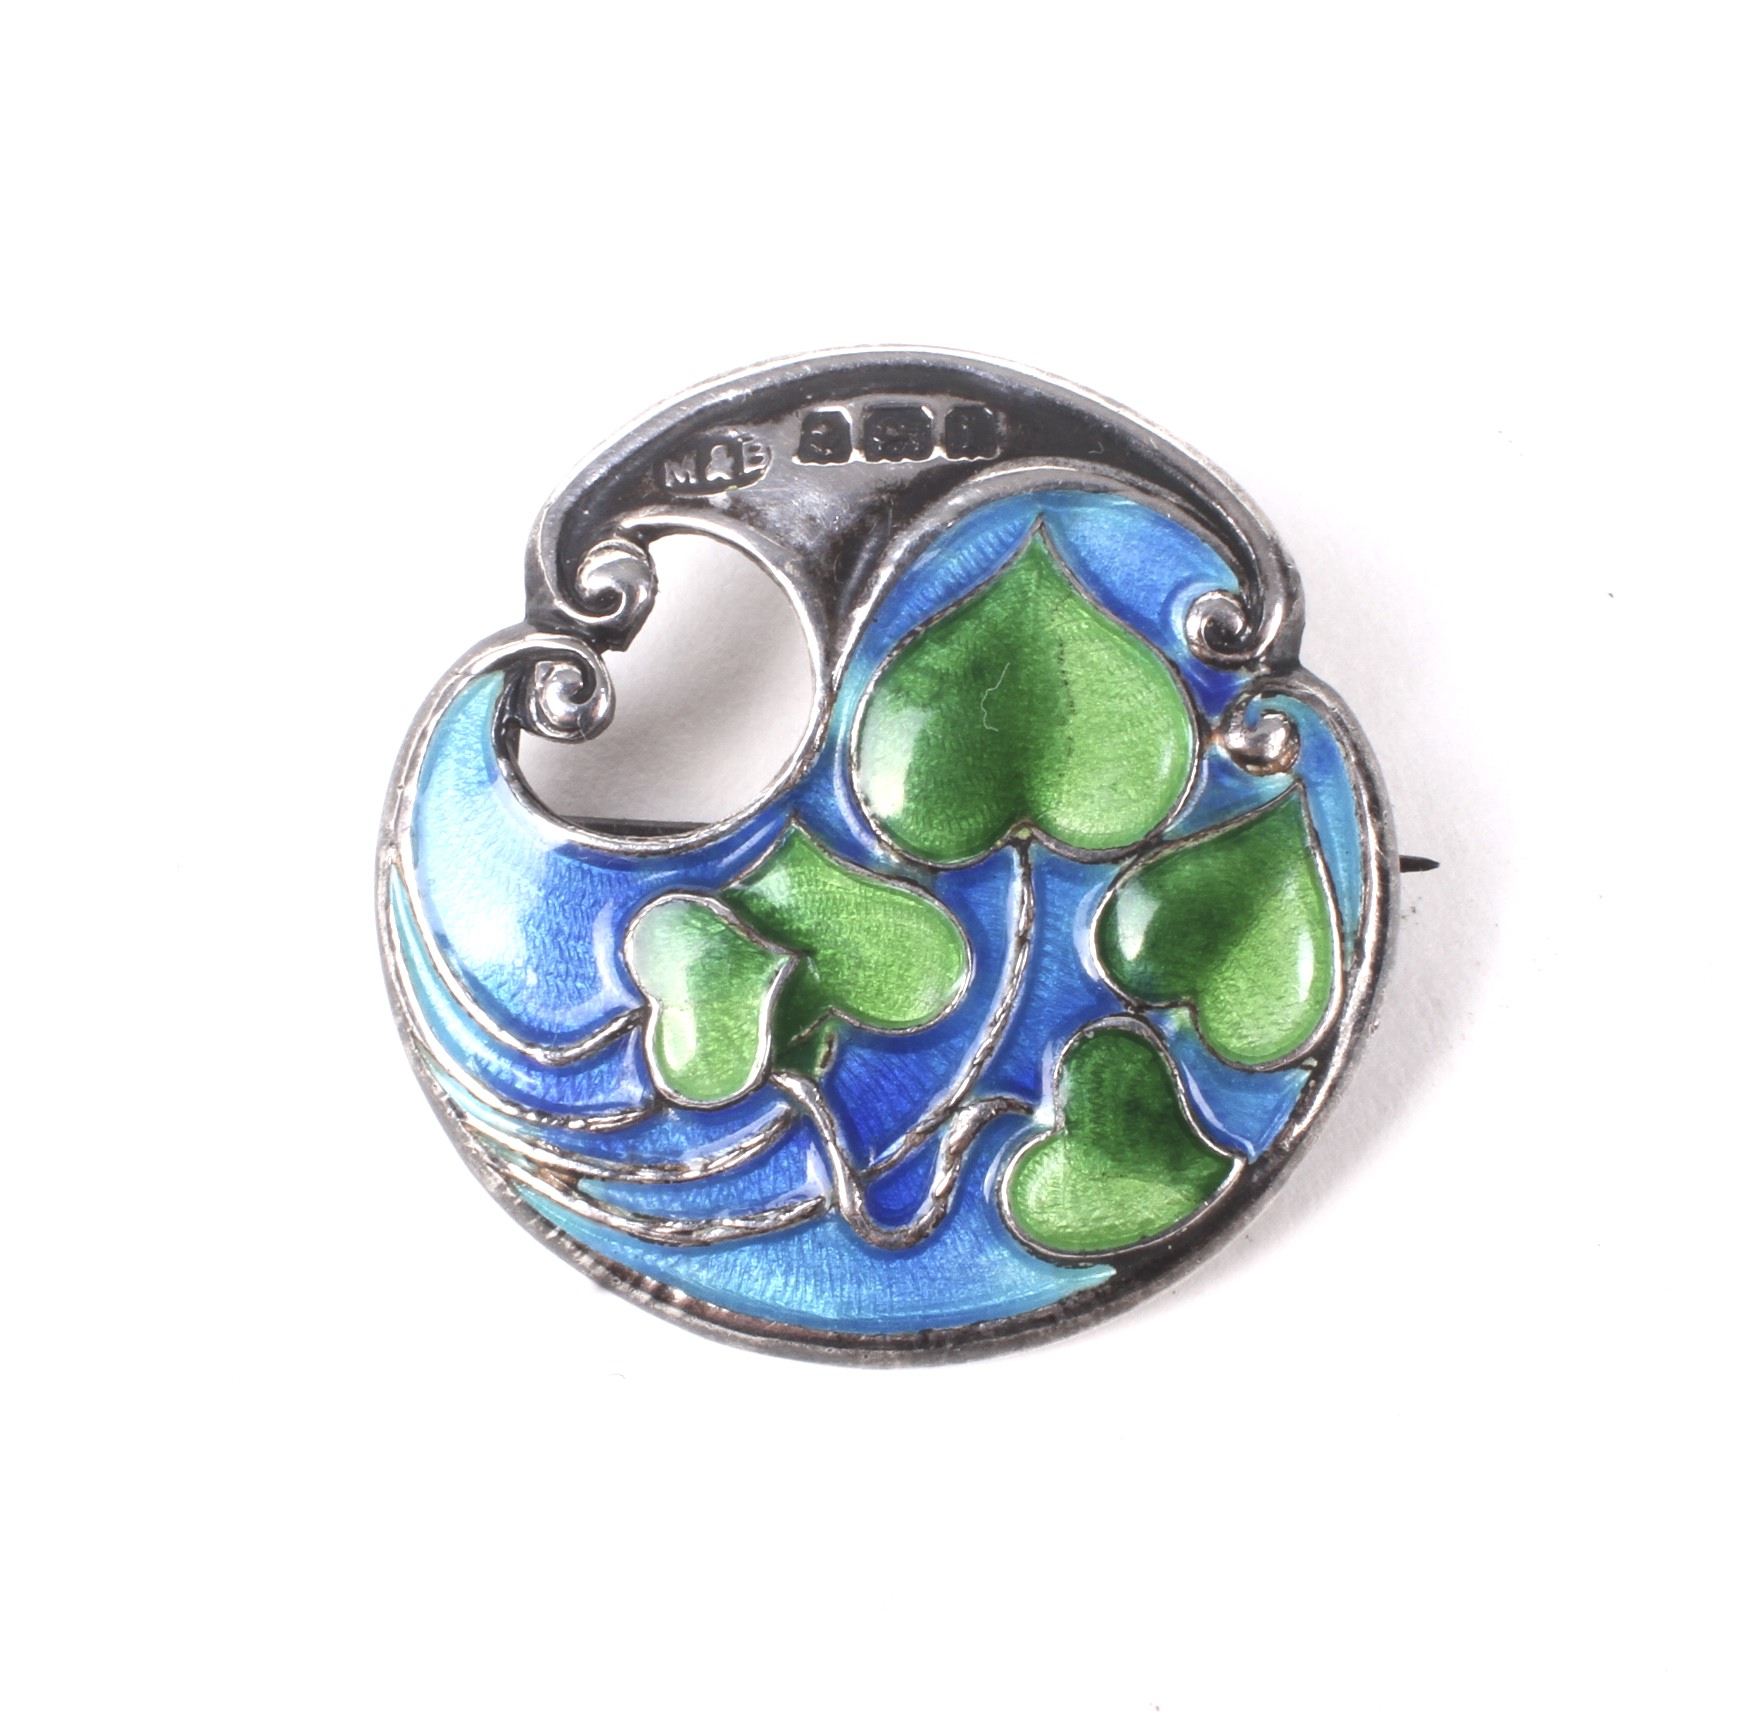 An Art Nouveau silver and enamel shaped-round brooch by Marples and Beasley.